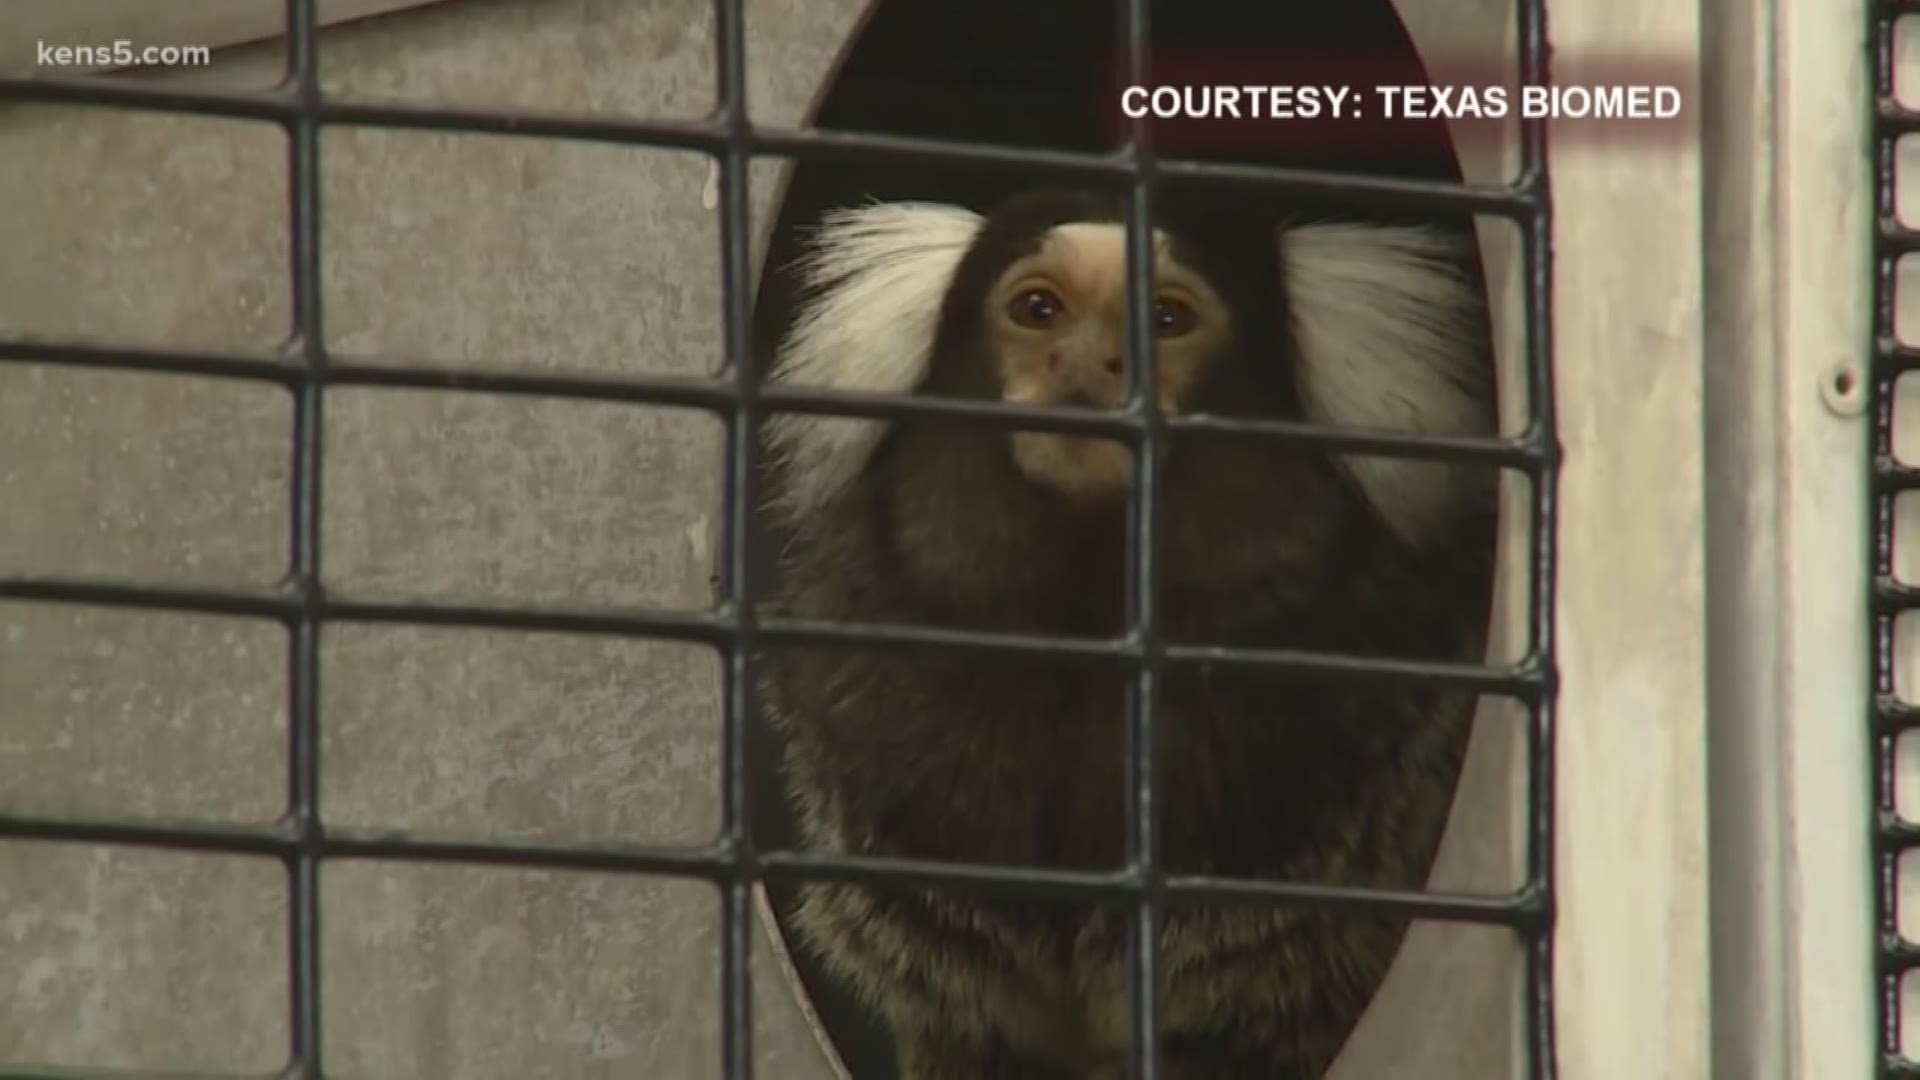 A new study by researchers at the Texas Biomedical Research Institute shows that marmosets may be the key to a Zika virus vaccine.